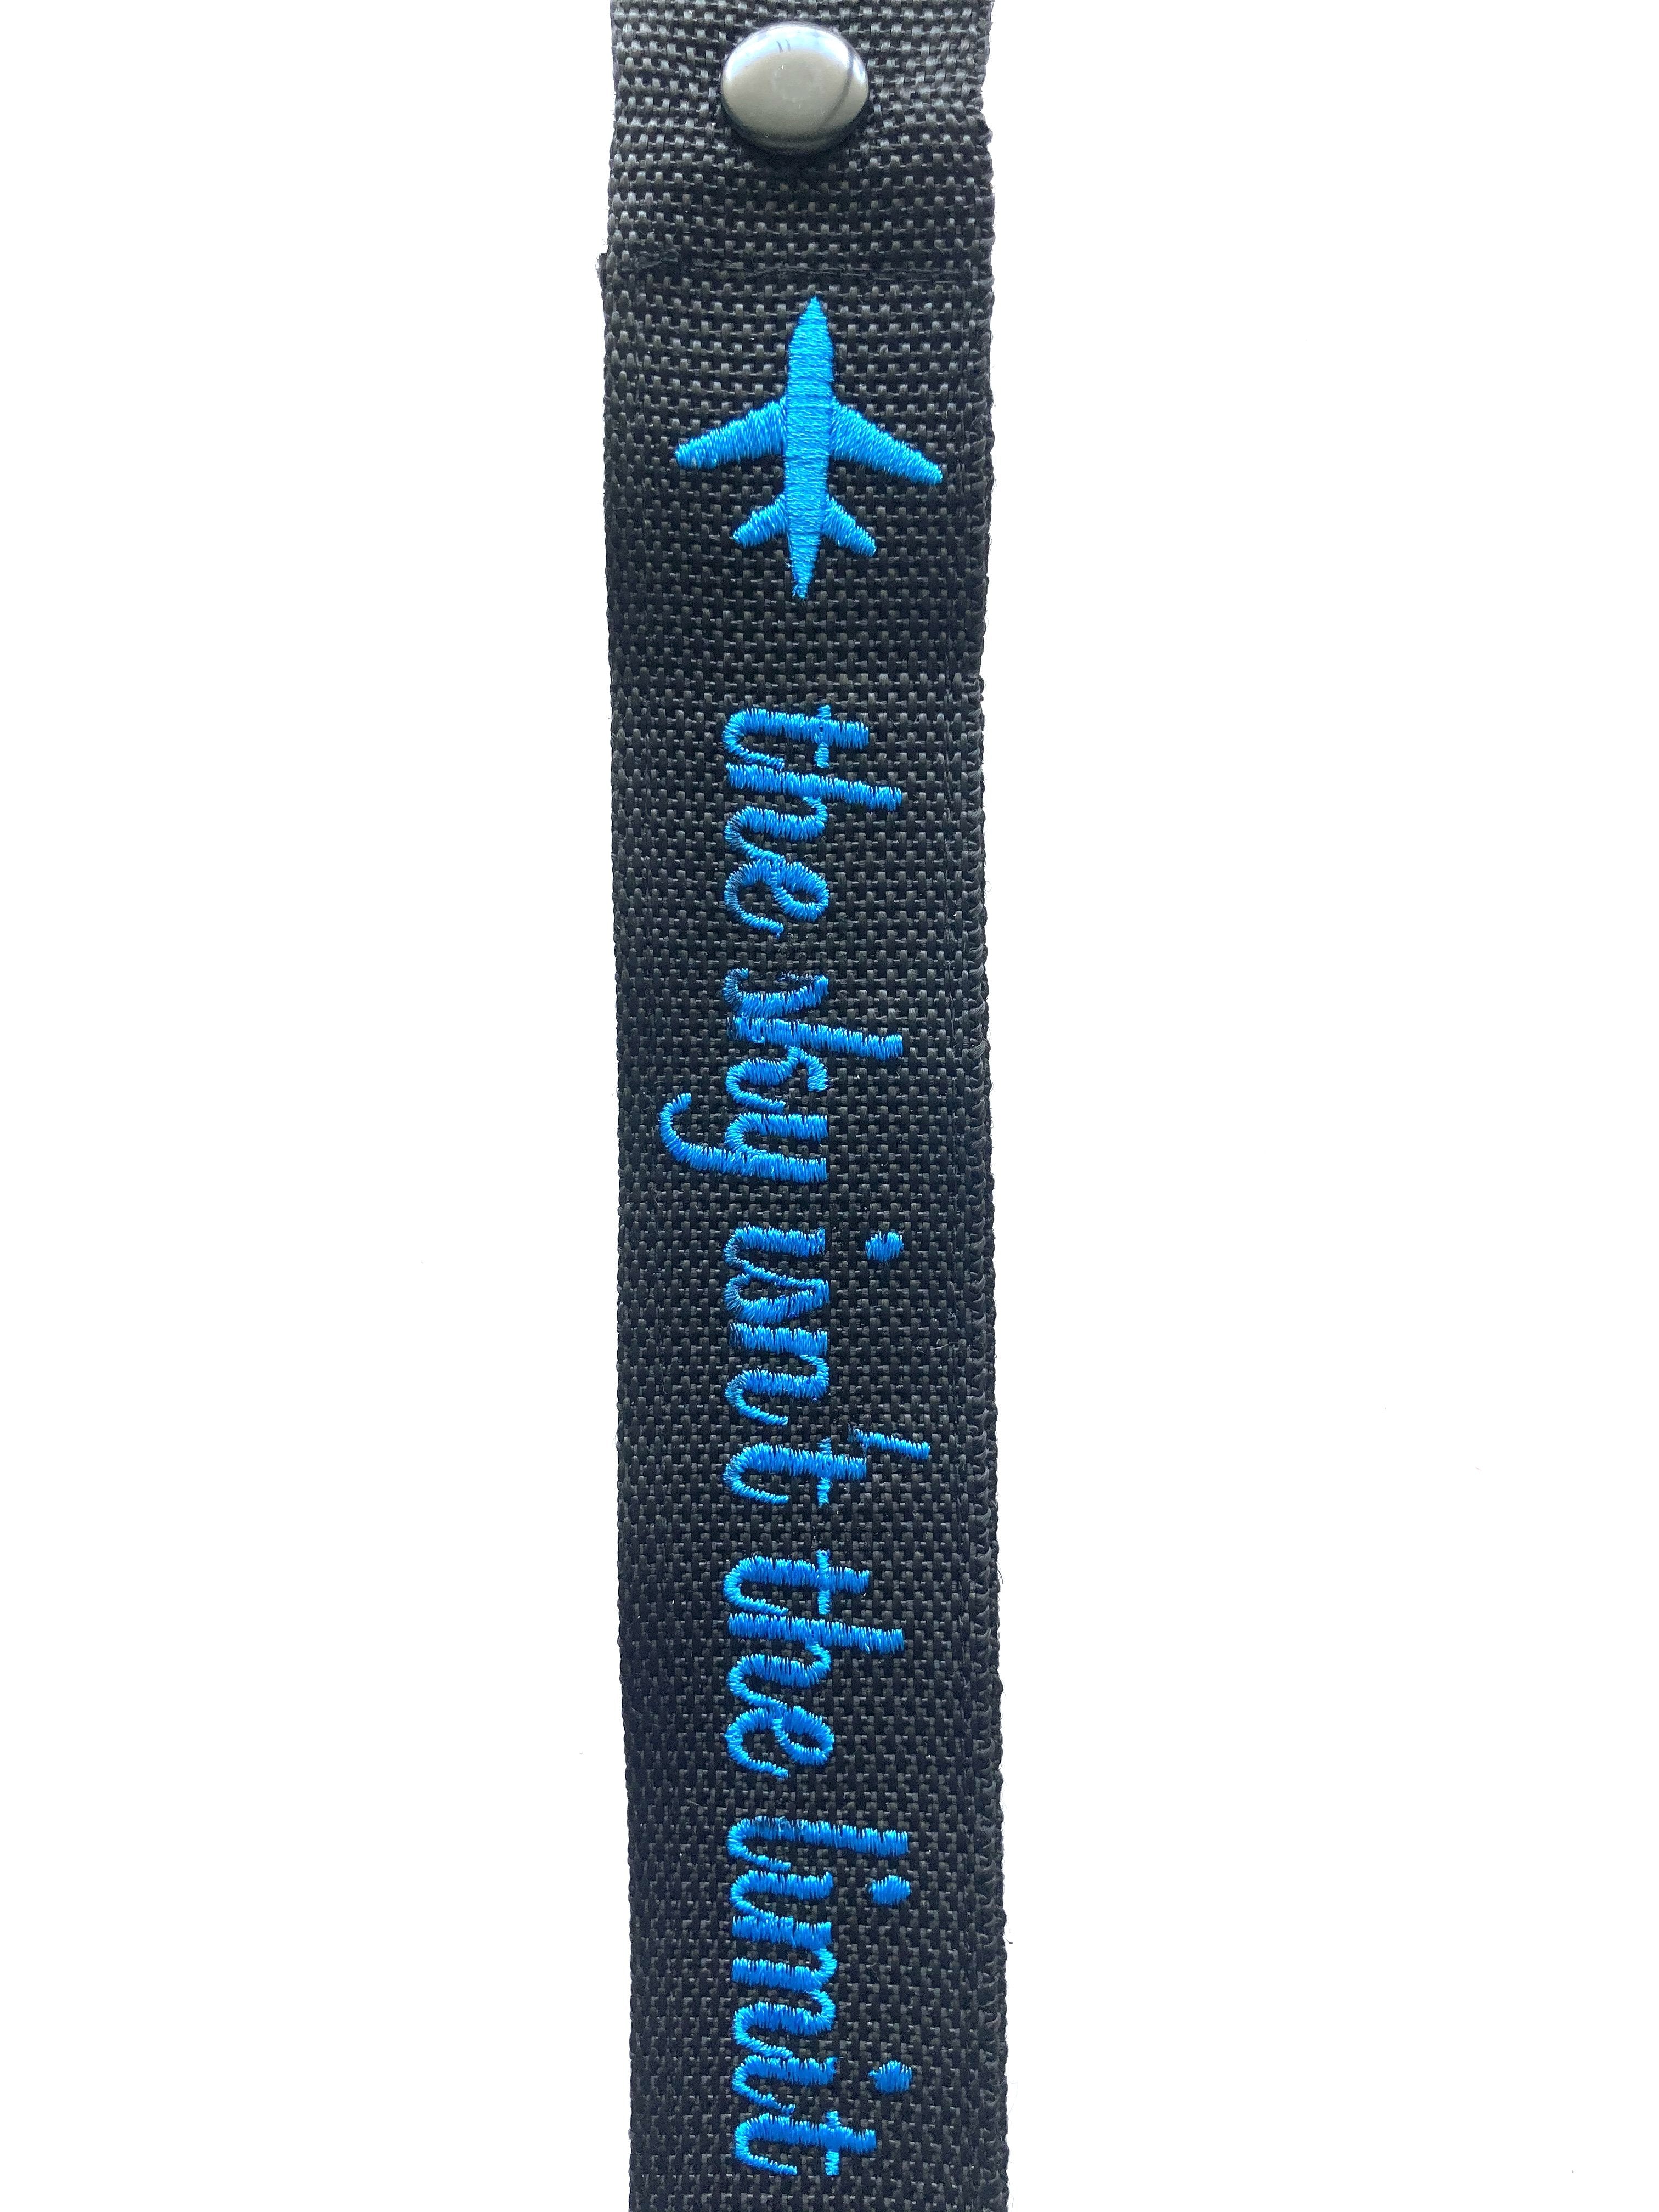 AIRLINE LINGO LUGGAGE TAGS The sky isnt the limit